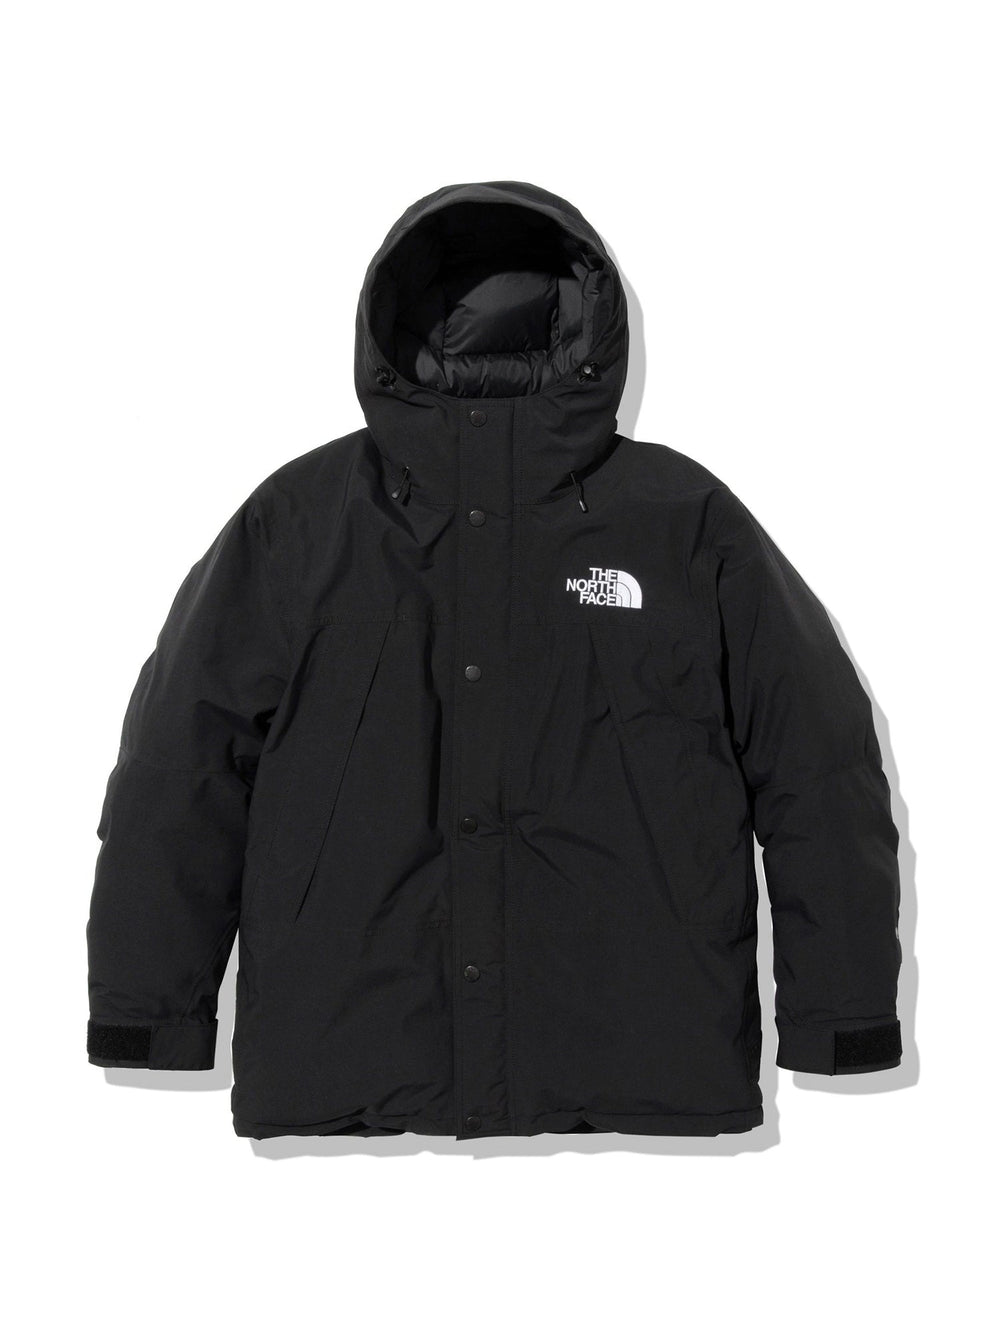 [THE NORTH FACE] Mountain Down Jacket / The North Face